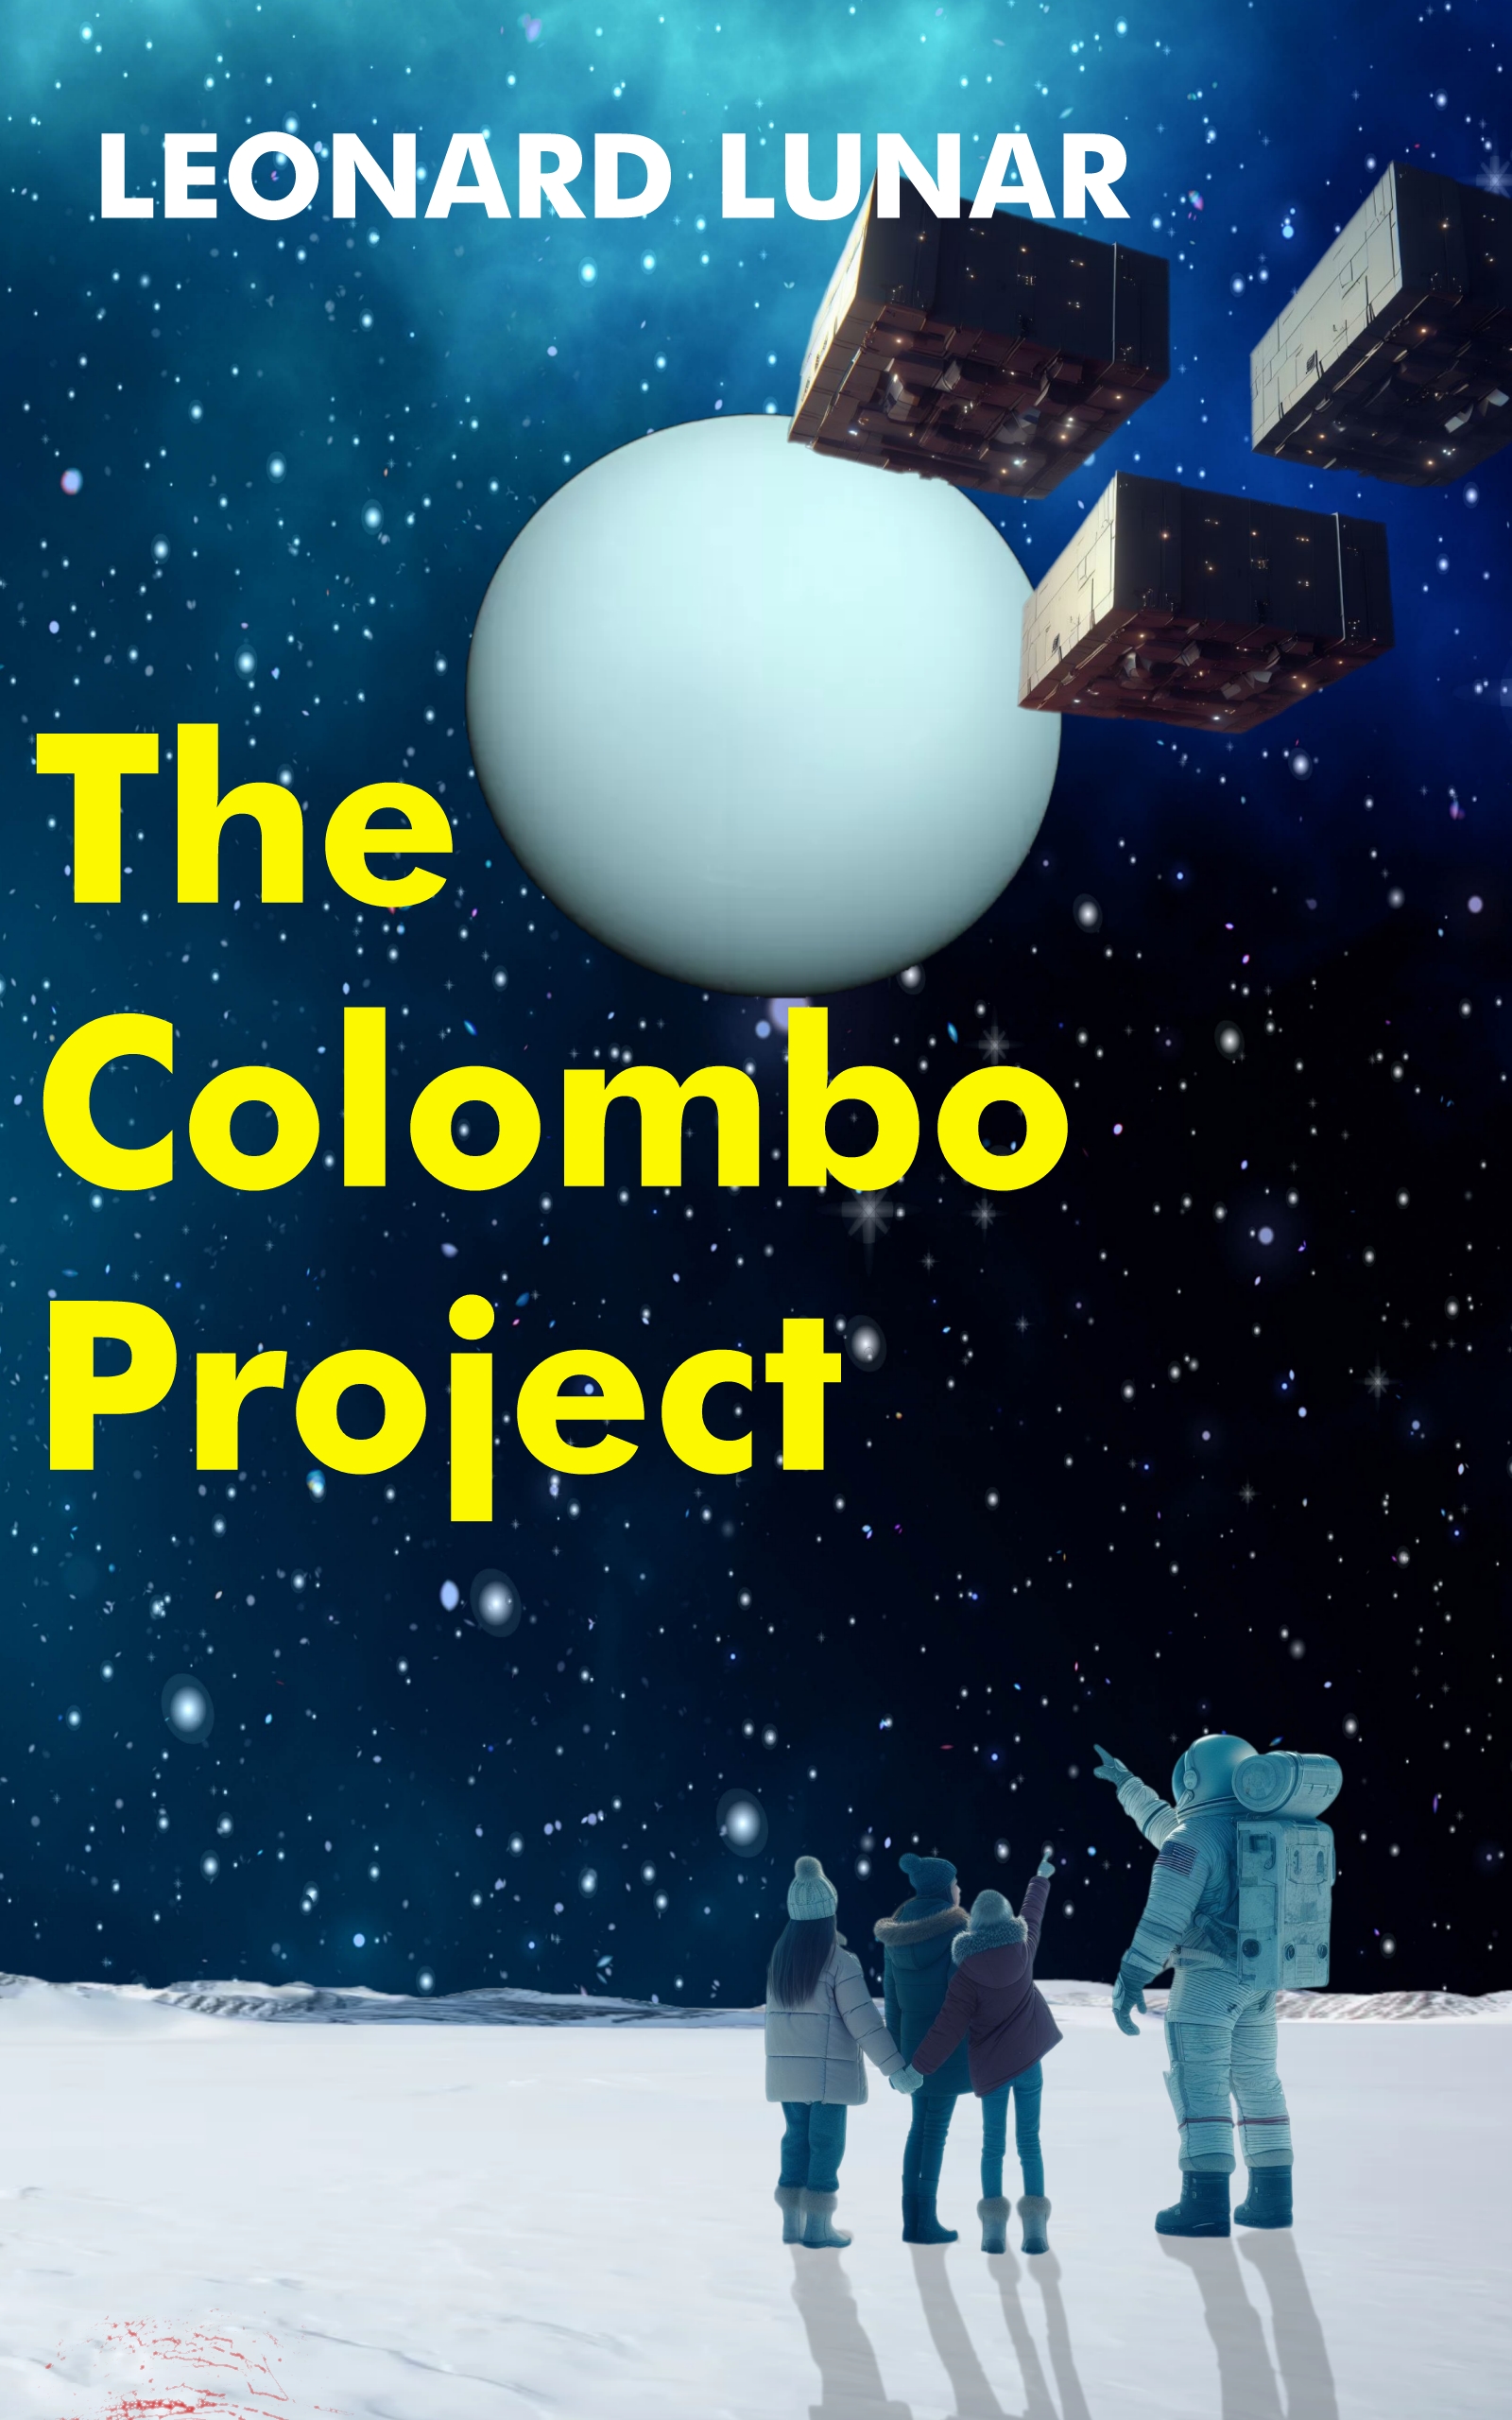 The Colombo Project